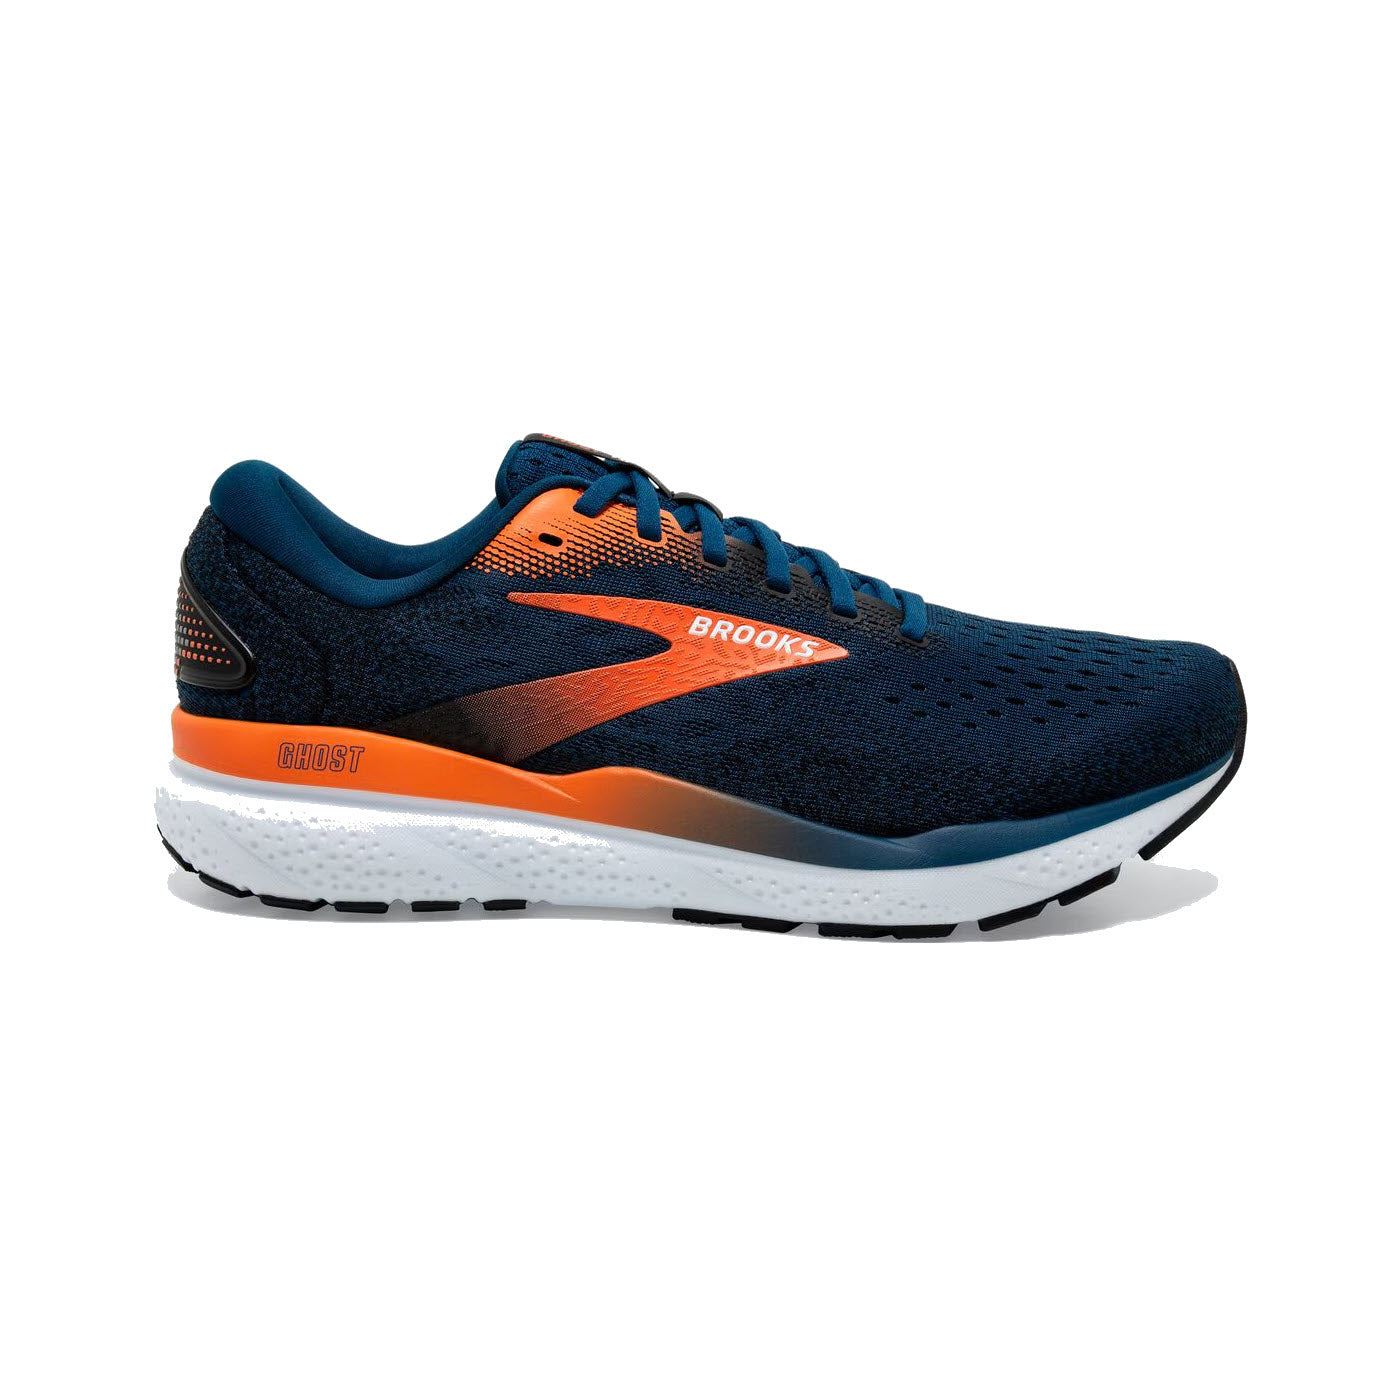 A blue men's Brooks Ghost 16 running shoe with orange accents and a breathable upper, displayed in profile view on a white background.